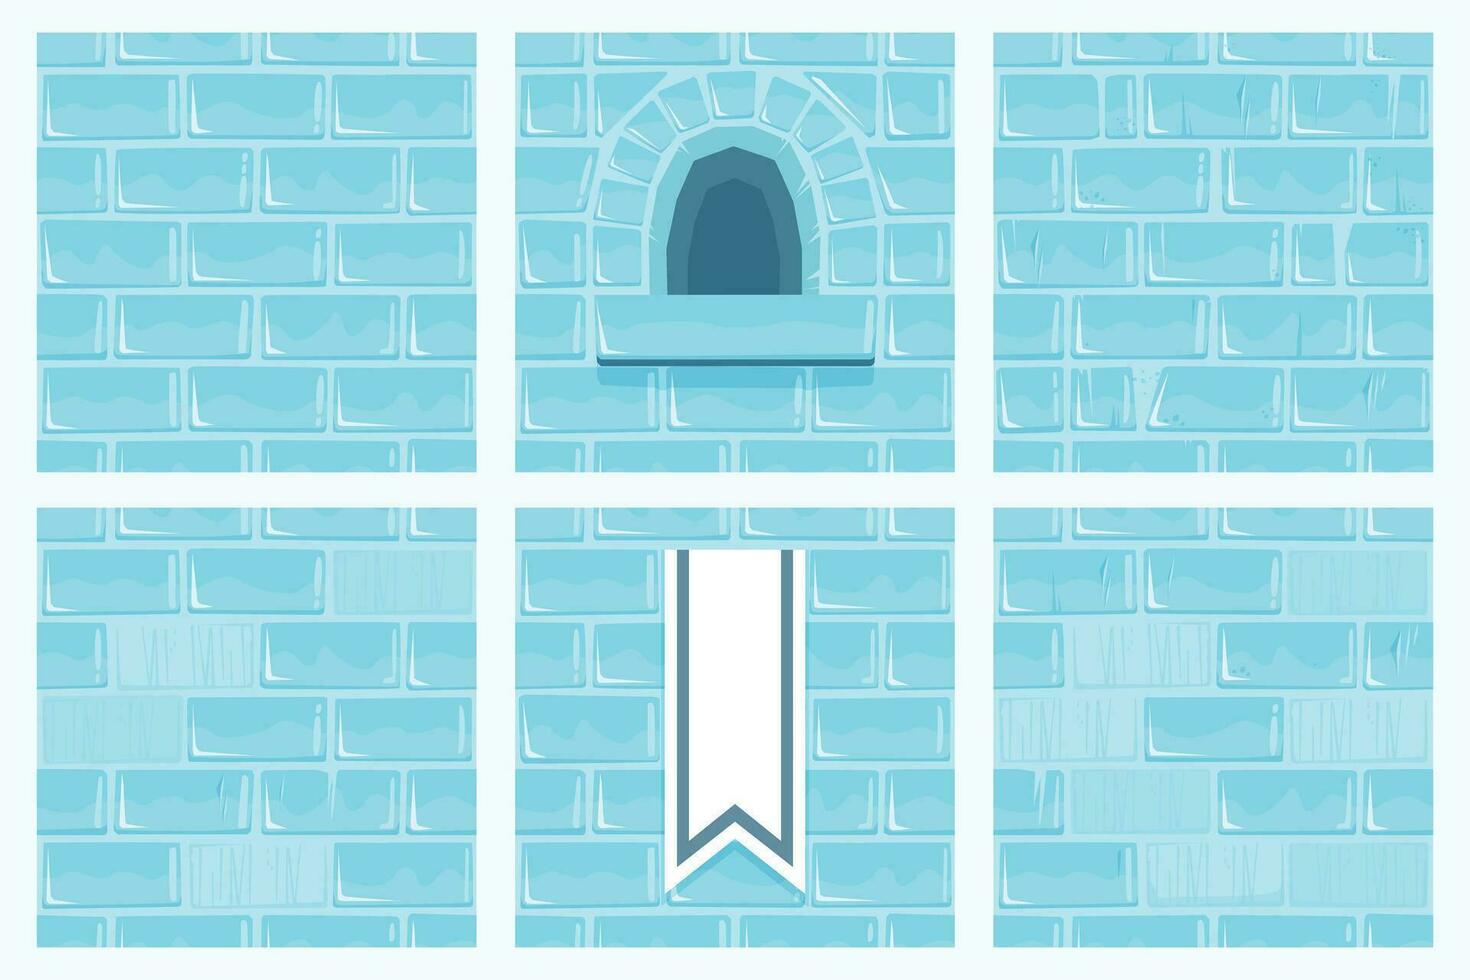 Cartoon Ice Brick Wall Collection, Set of Square Seamless Backgrounds for Castle Design vector